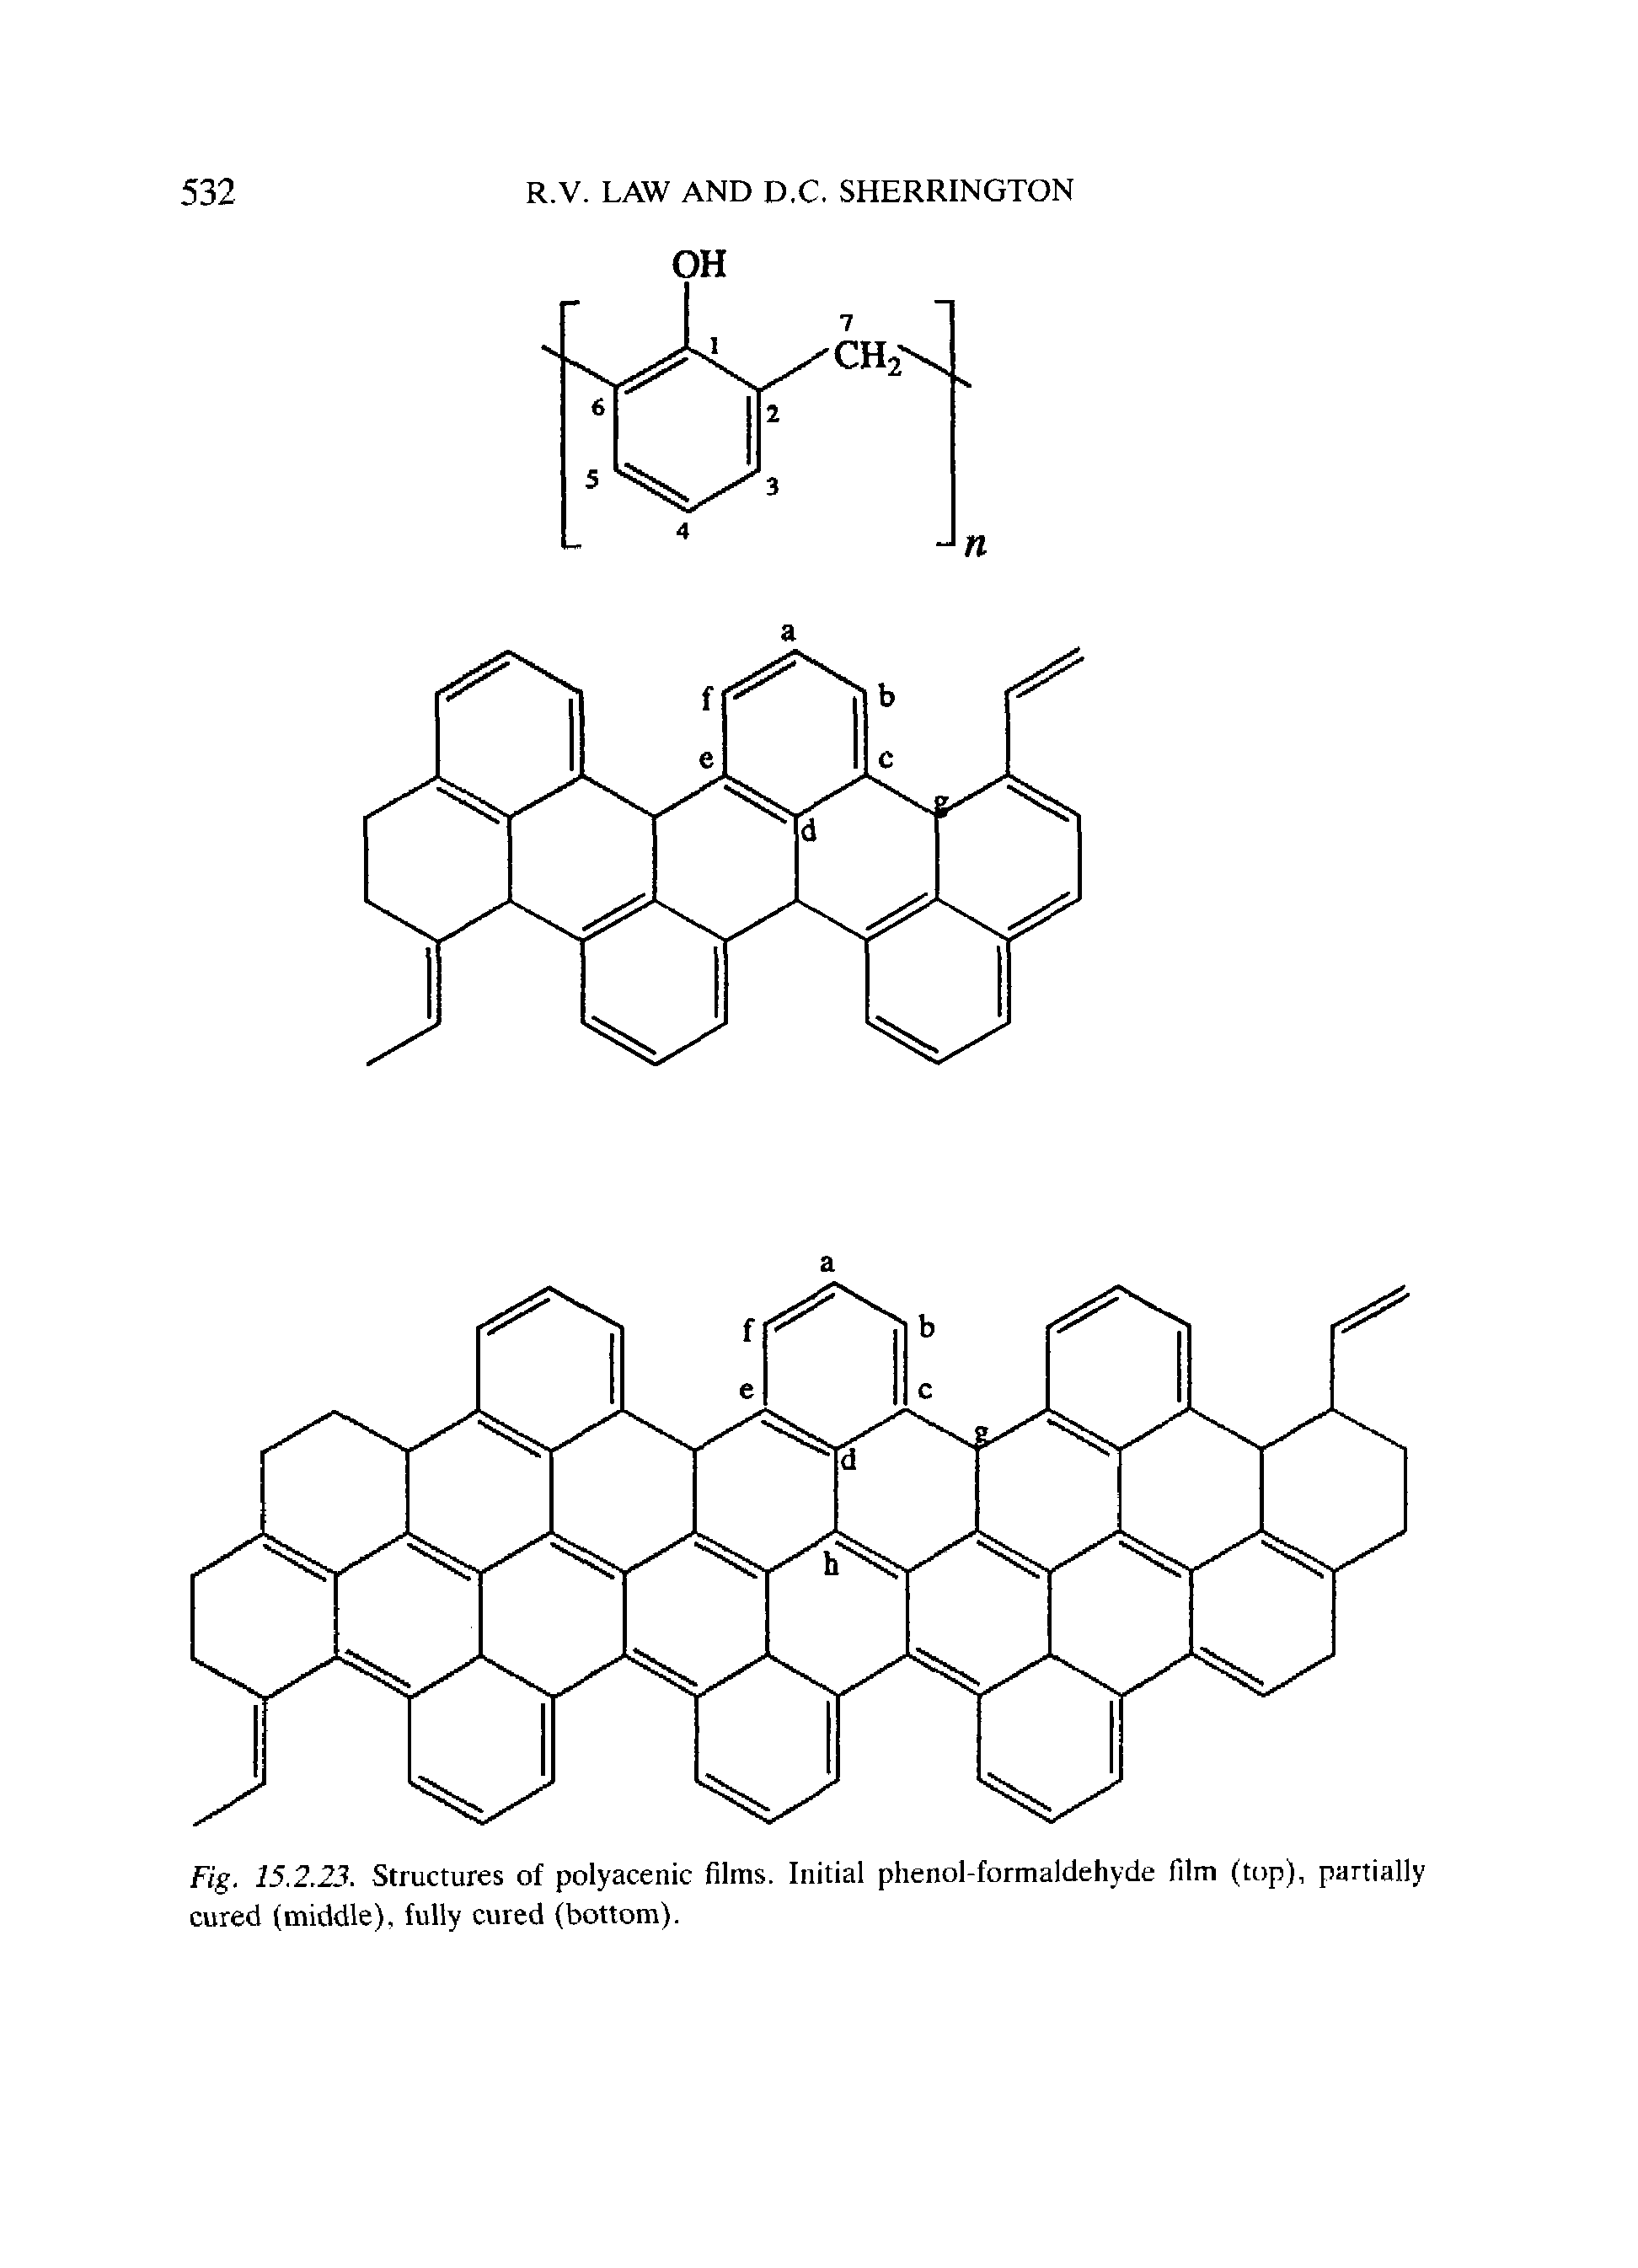 Fig. 15.2,23. Structures of polyacenic films. Initial phenol-formaldehyde film (top), partially cured (middle), fully cured (bottom).